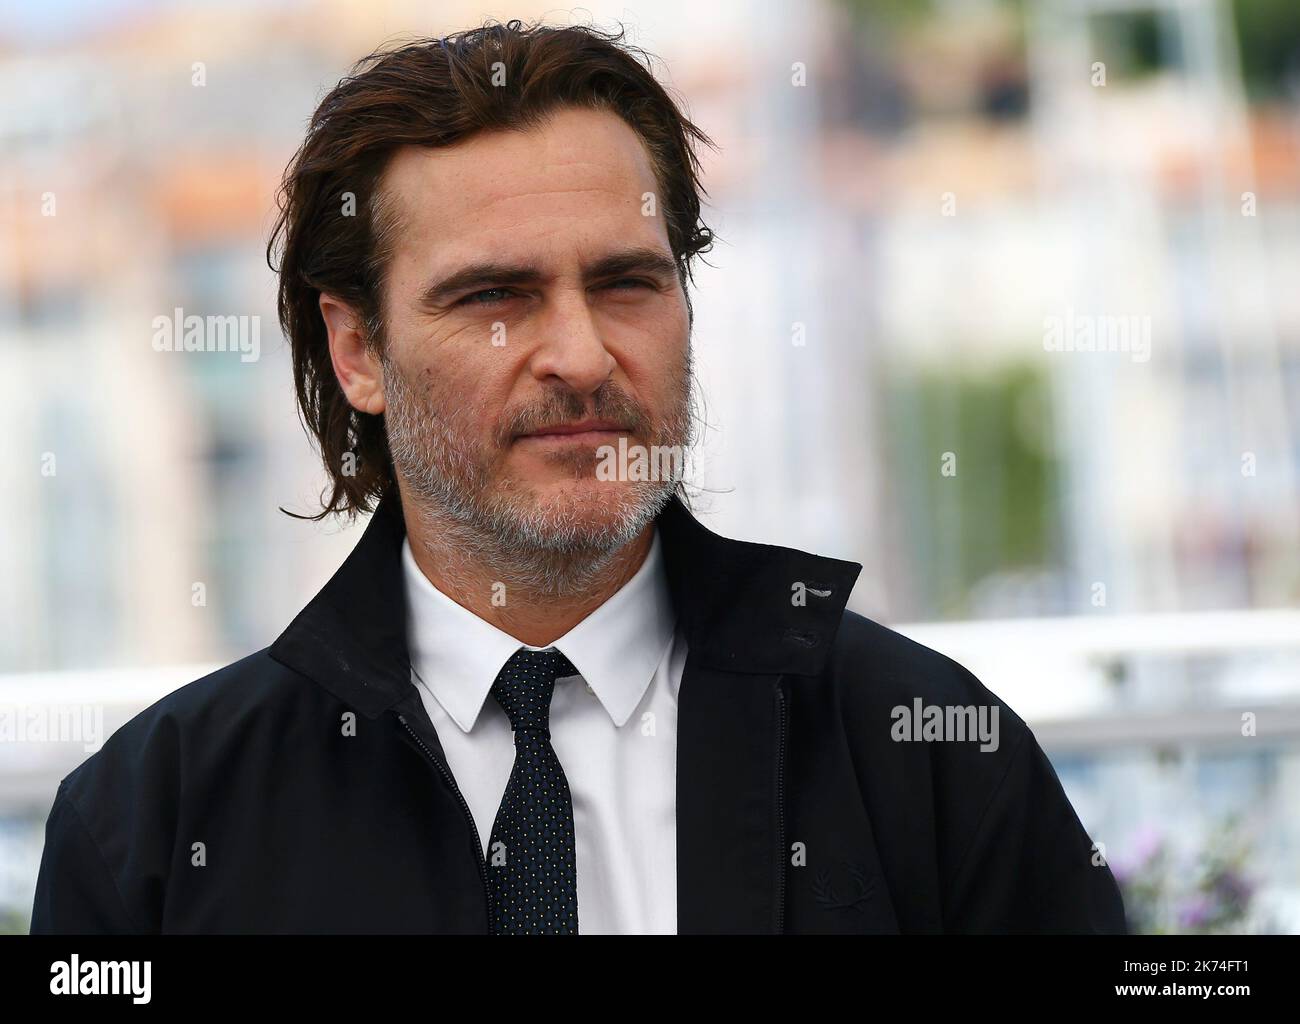 ©PHOTOPQR/NICE MATIN ; US actor Joaquin Phoenix poses on May 27, 2017 during a photocall for the film 'You Were Never Really Here' at the 70th edition of the Cannes Film Festival in Cannes, southern France.   70th annual Cannes Film Festival in Cannes, France, May 2017. The film festival will run from 17 to 28 May. Stock Photo